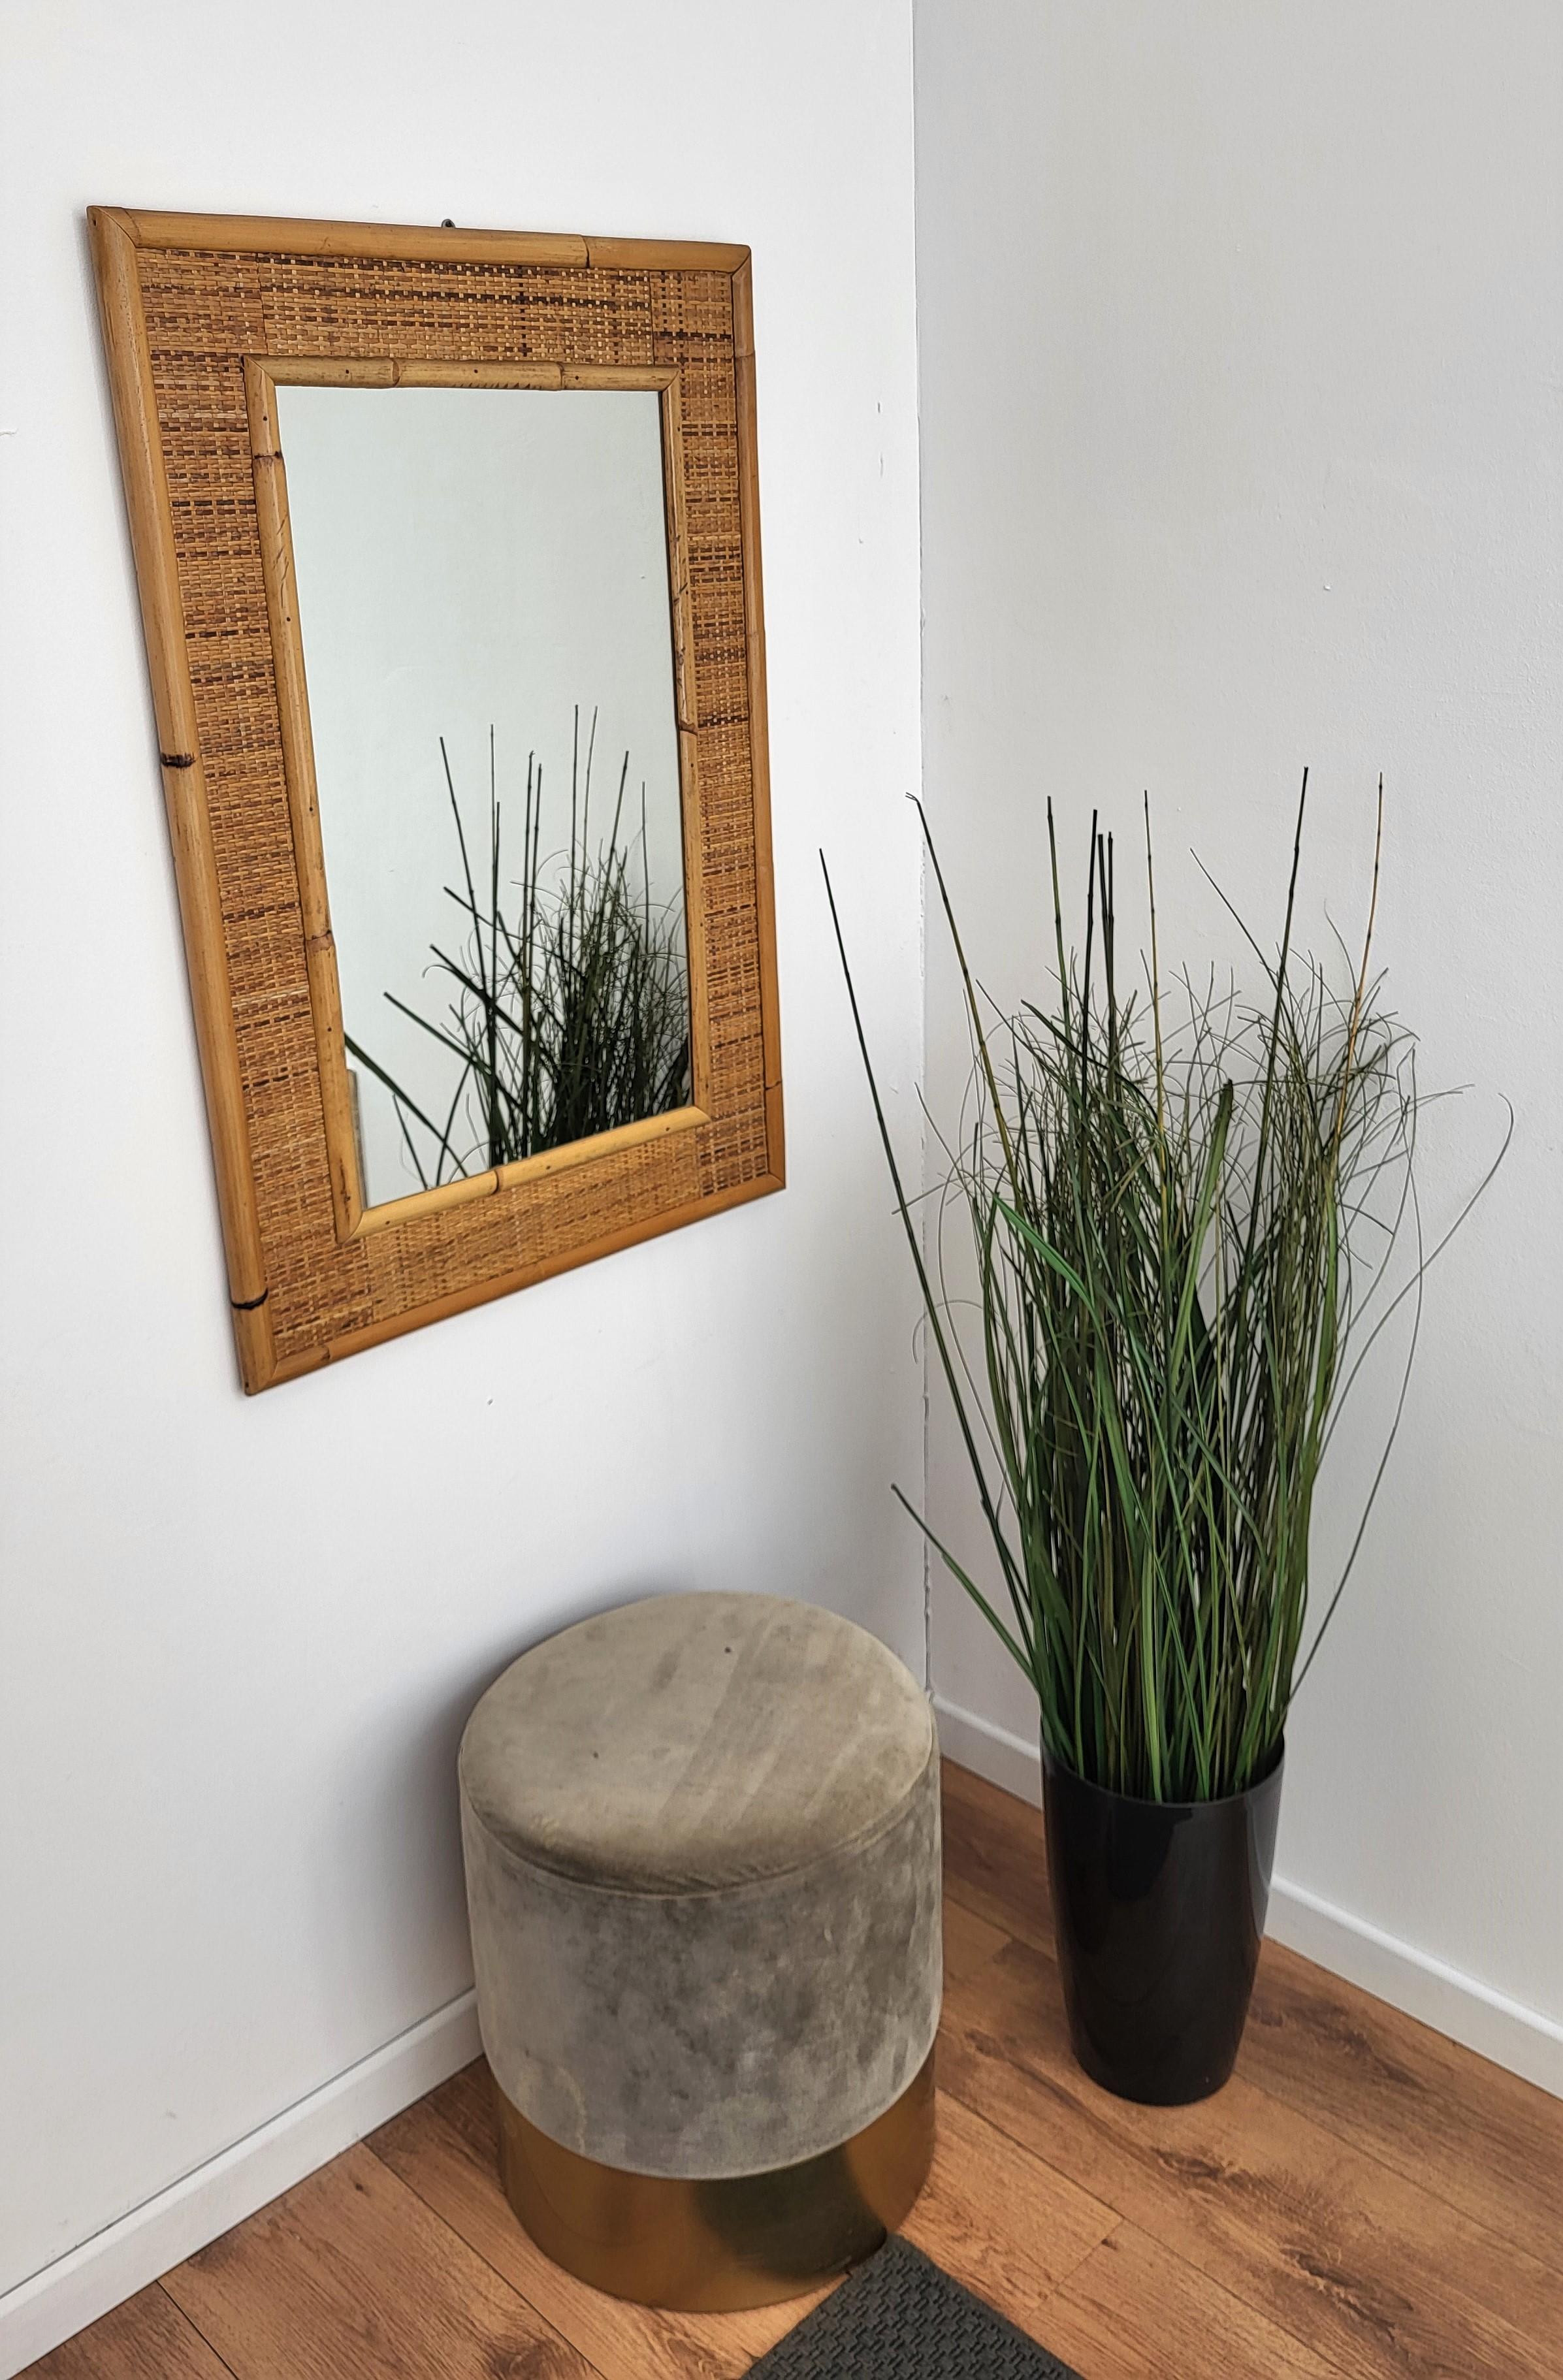 Beautiful 1970s Italian Mid-Century Modern mirror in bamboo and rattan probably from renowned Dal Vera manufacturer. The organic beauty of the woven materials is timeless and Classic, making bamboo and rattan furniture incredibly versatile.